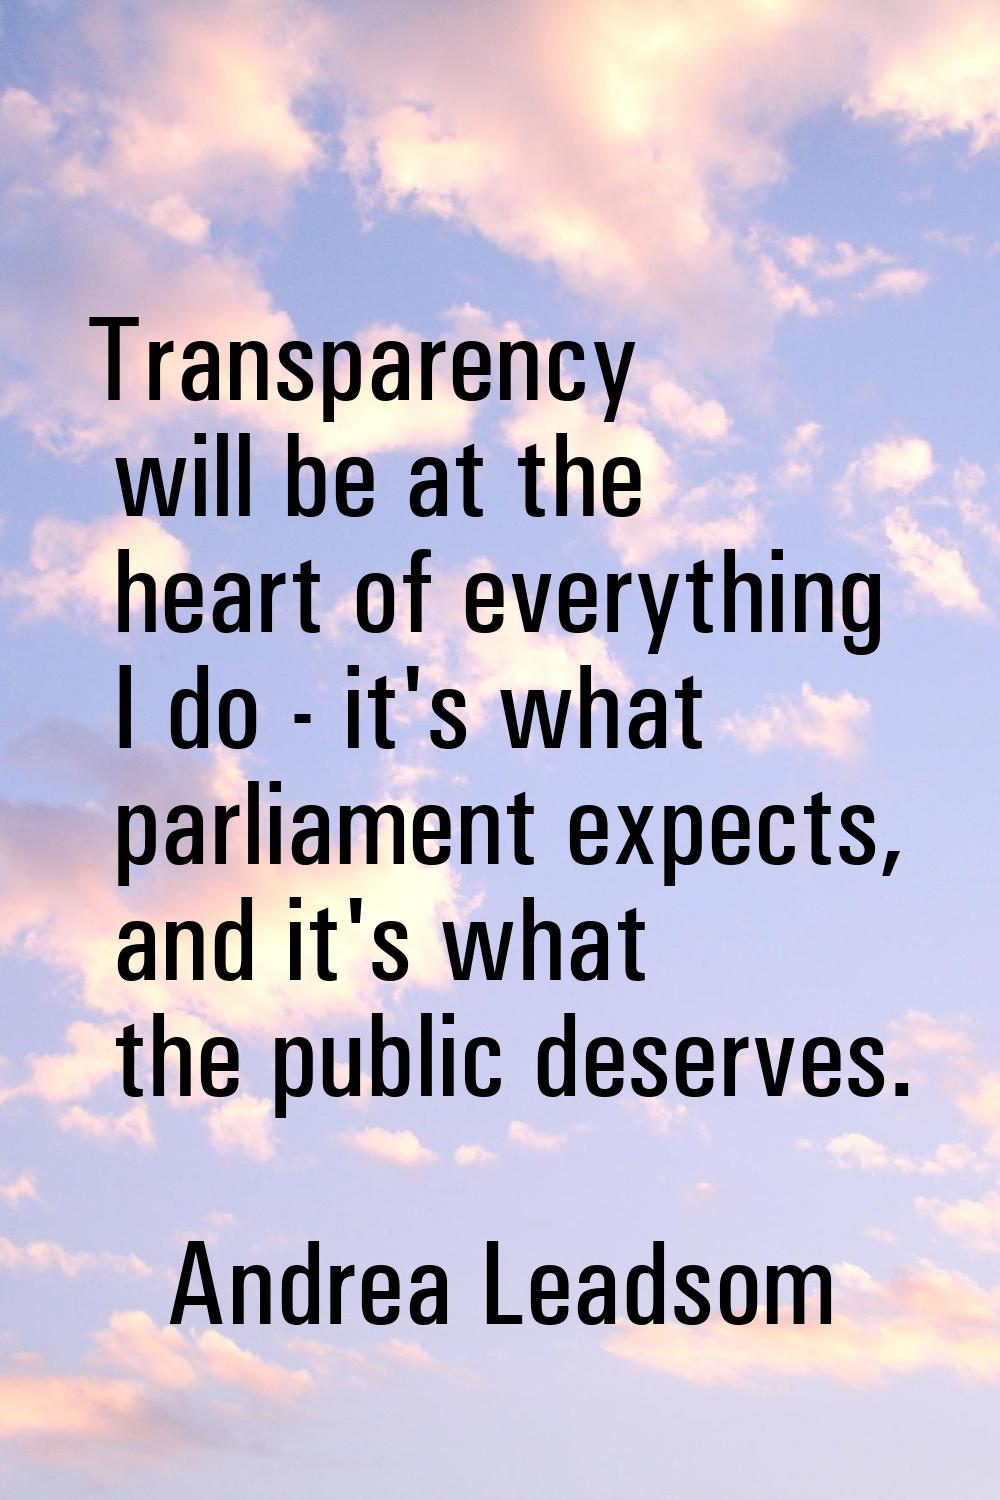 Transparency will be at the heart of everything I do - it's what parliament expects, and it's what 